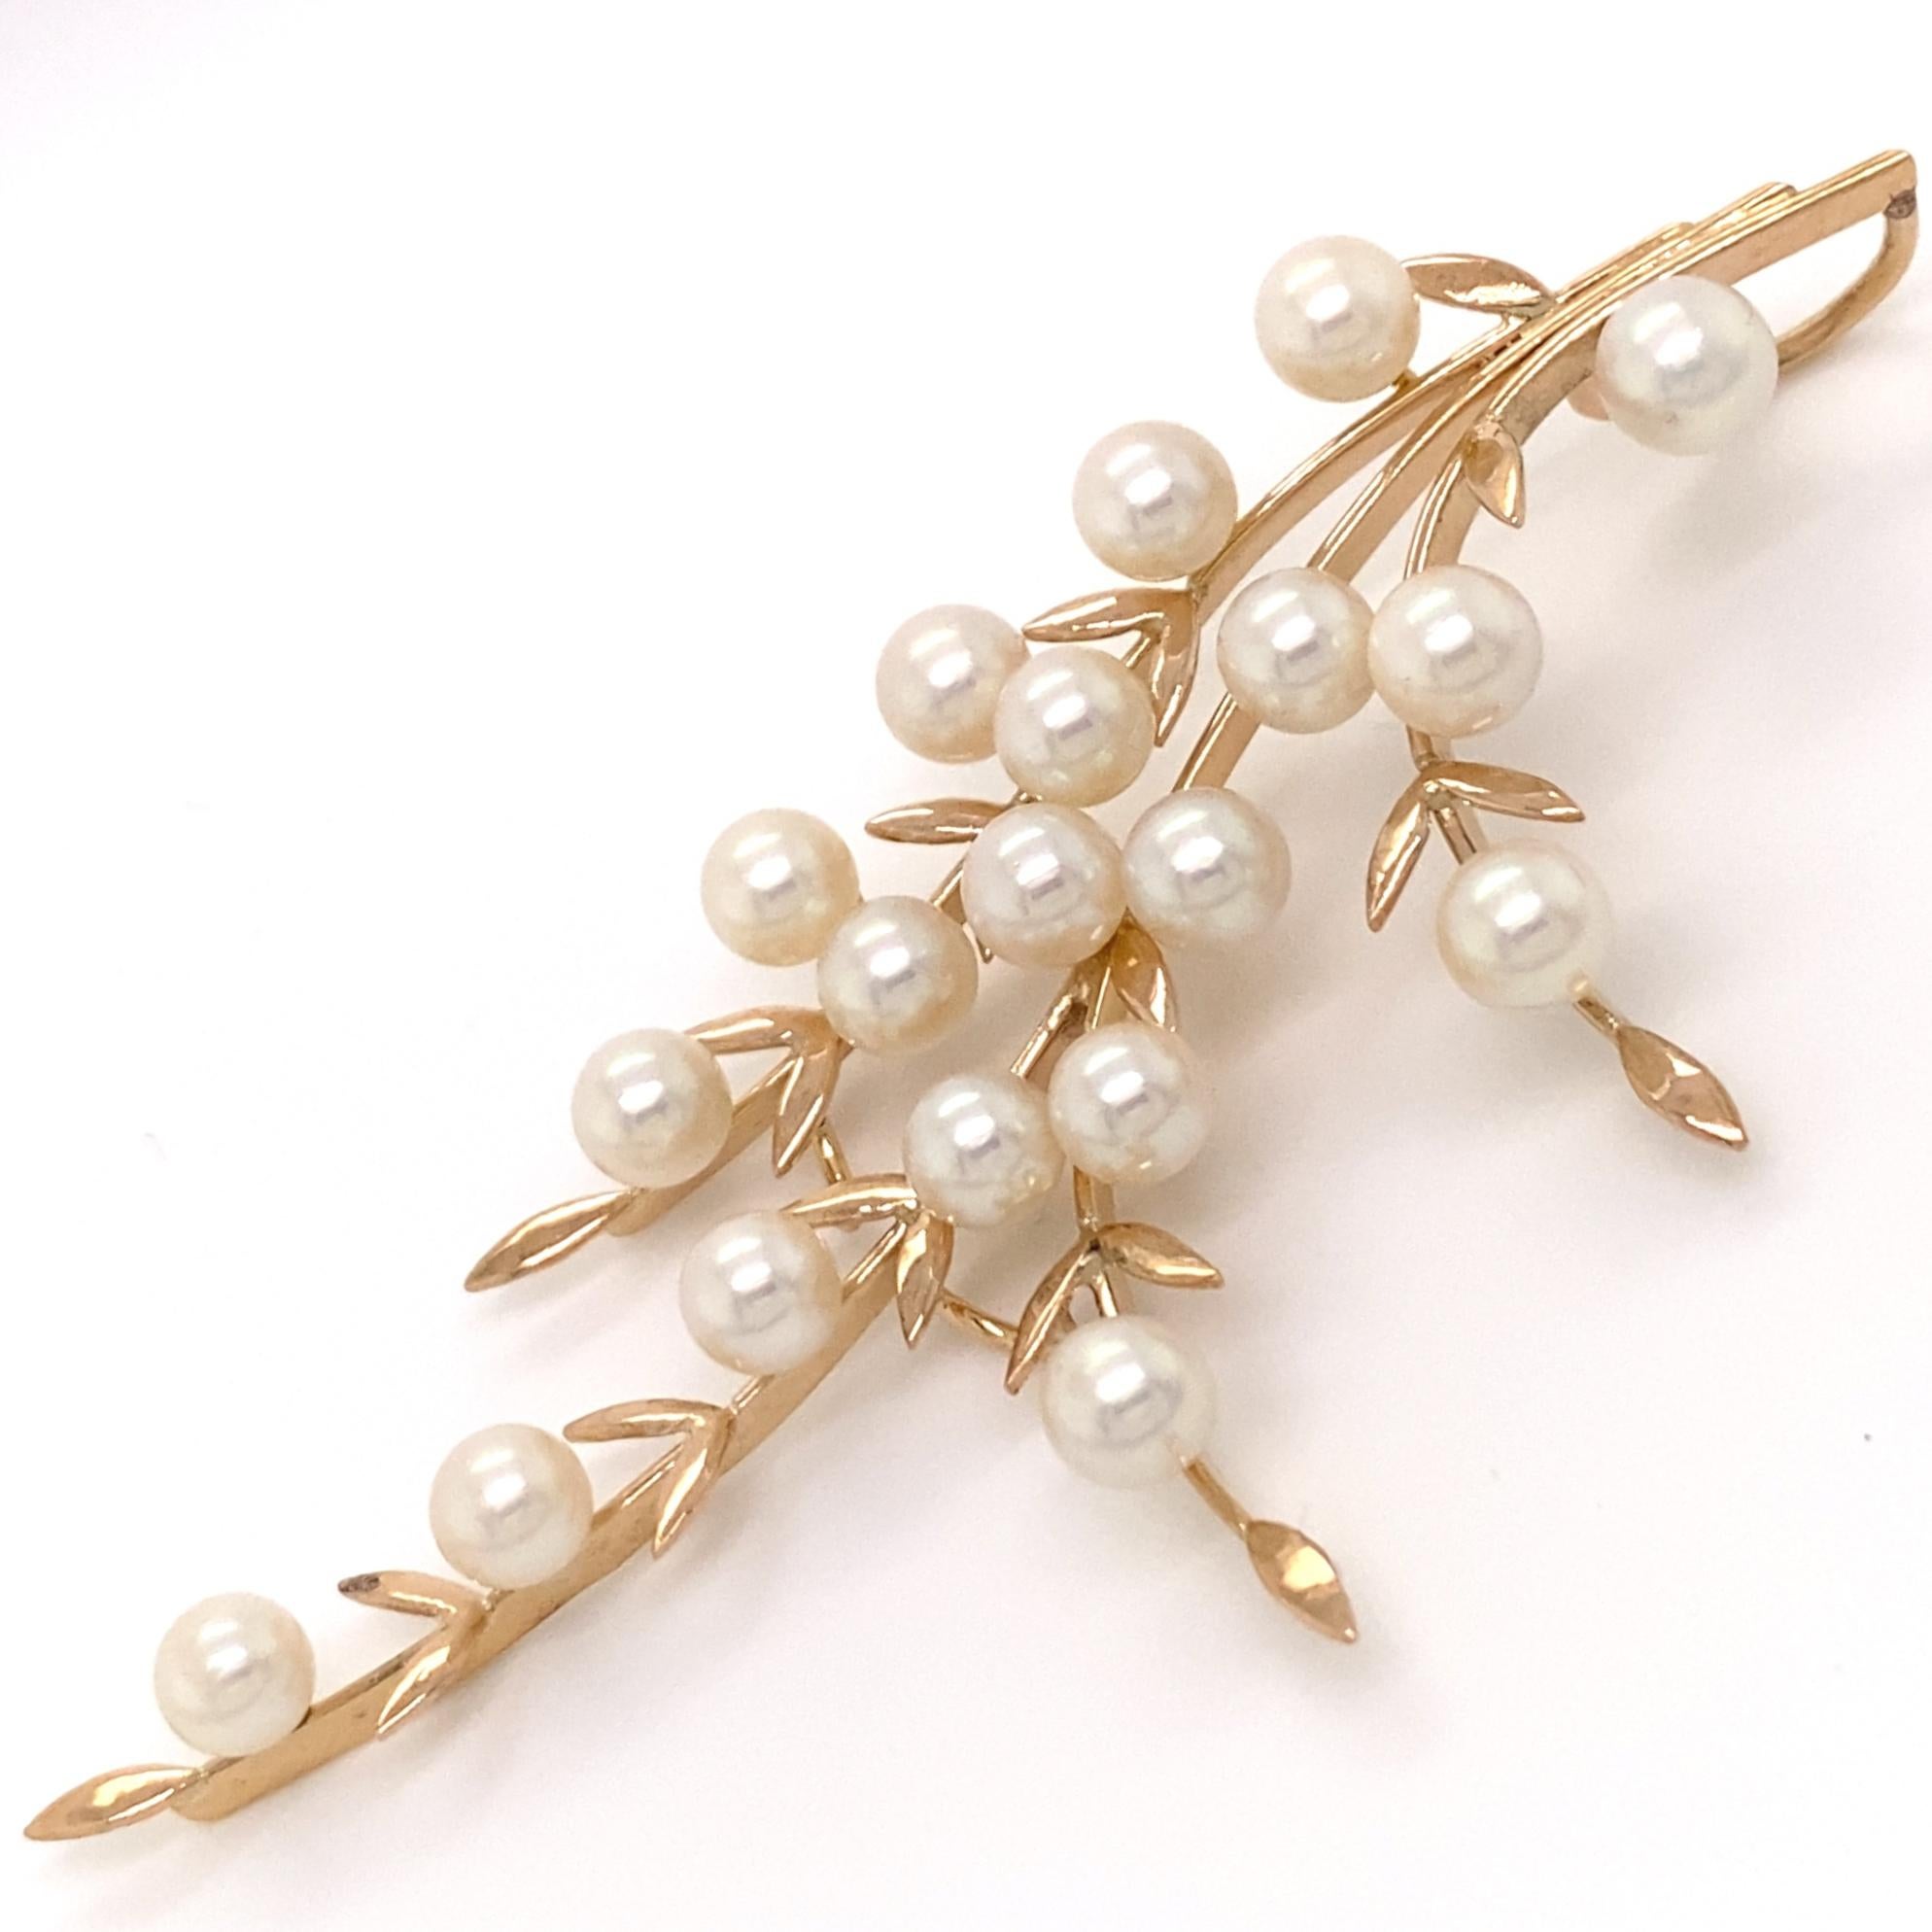 Eytan Brandes converted this 1970s pearl spray brooch to a pendant.  

As a pin, it demurely announced 